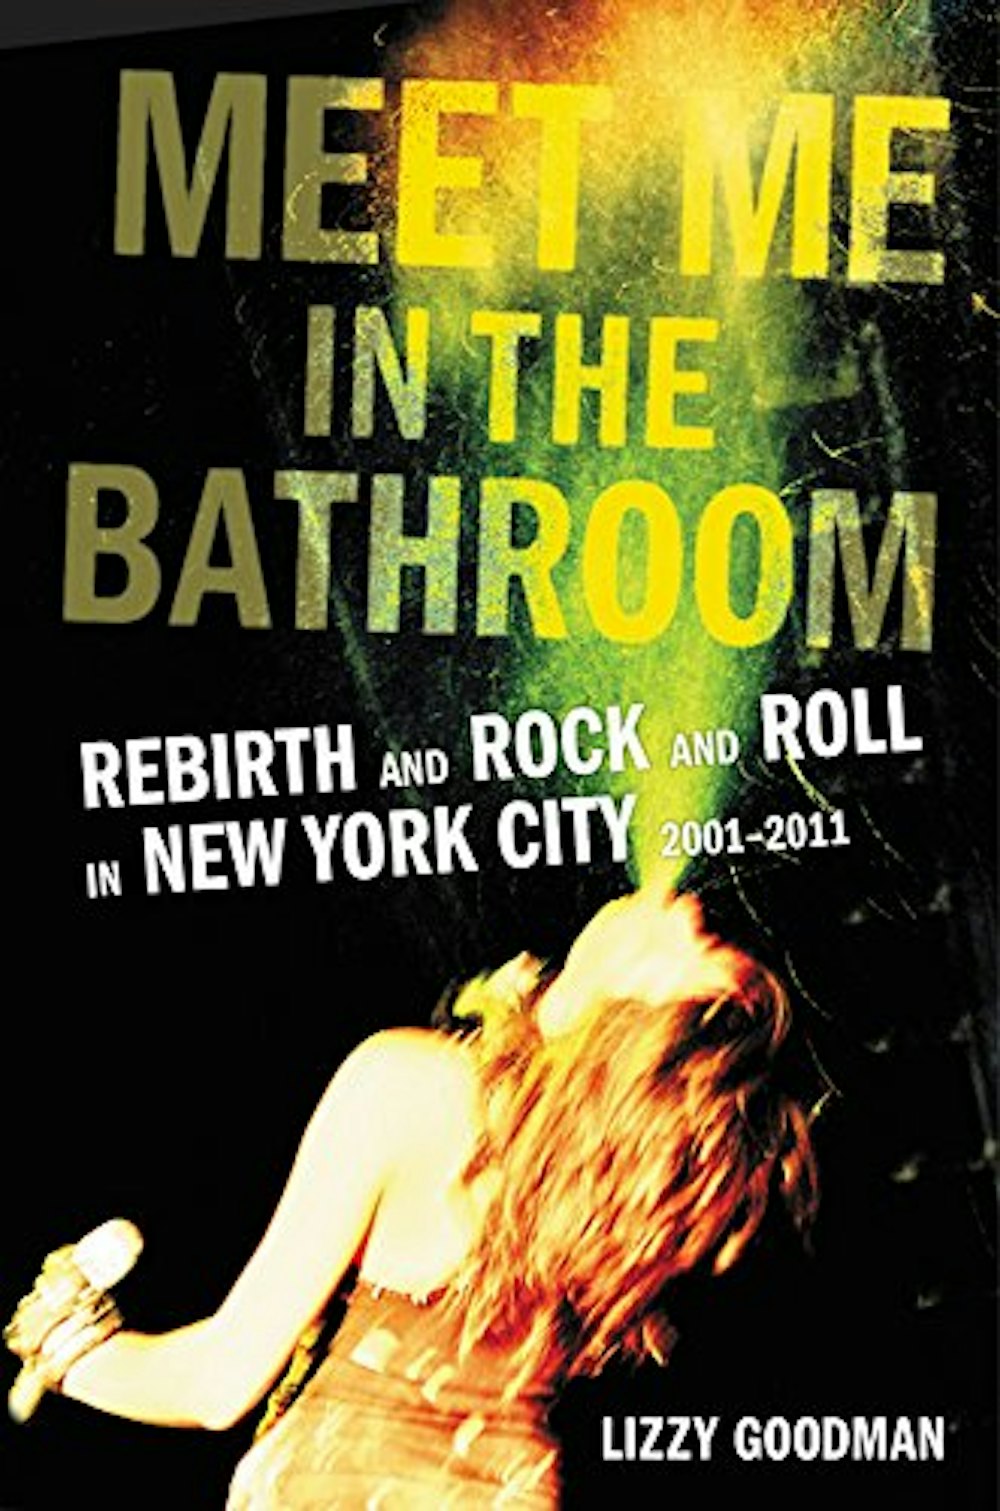 Meet Me In The Bathroom: Rebirth and Rock and Roll in New York City 2001-2011